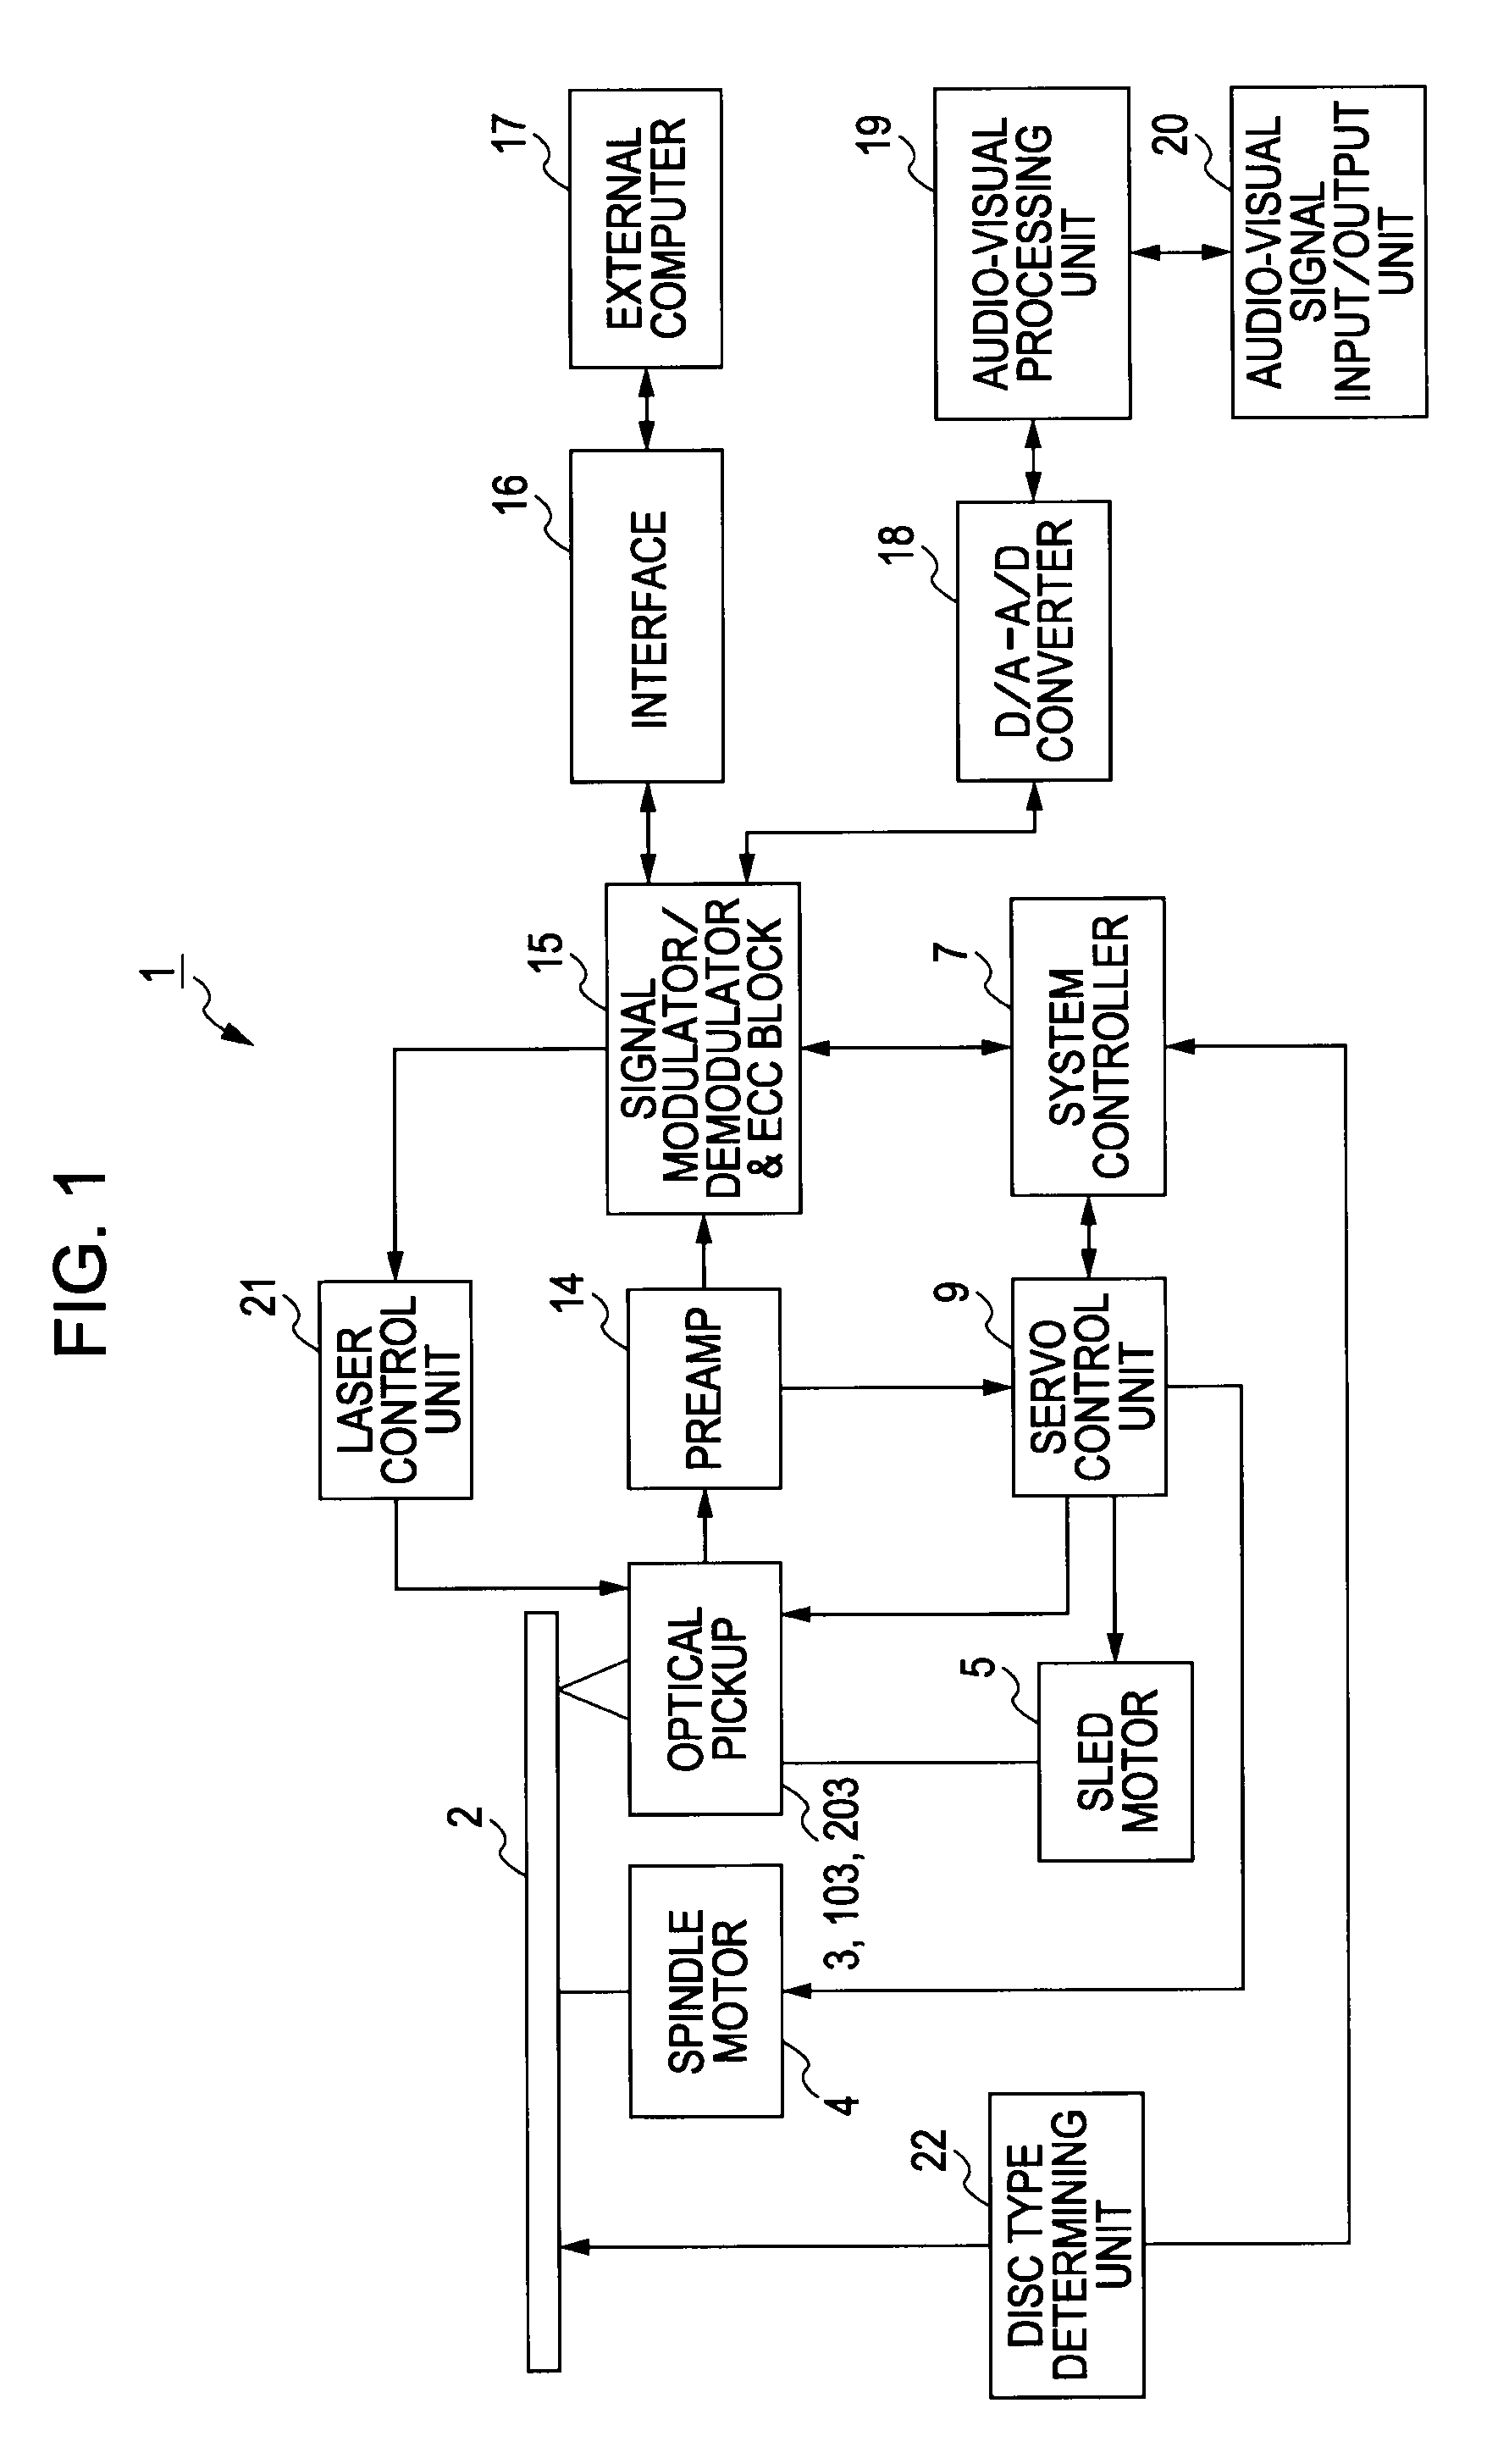 Object lens, optical pickup, and optical disc device